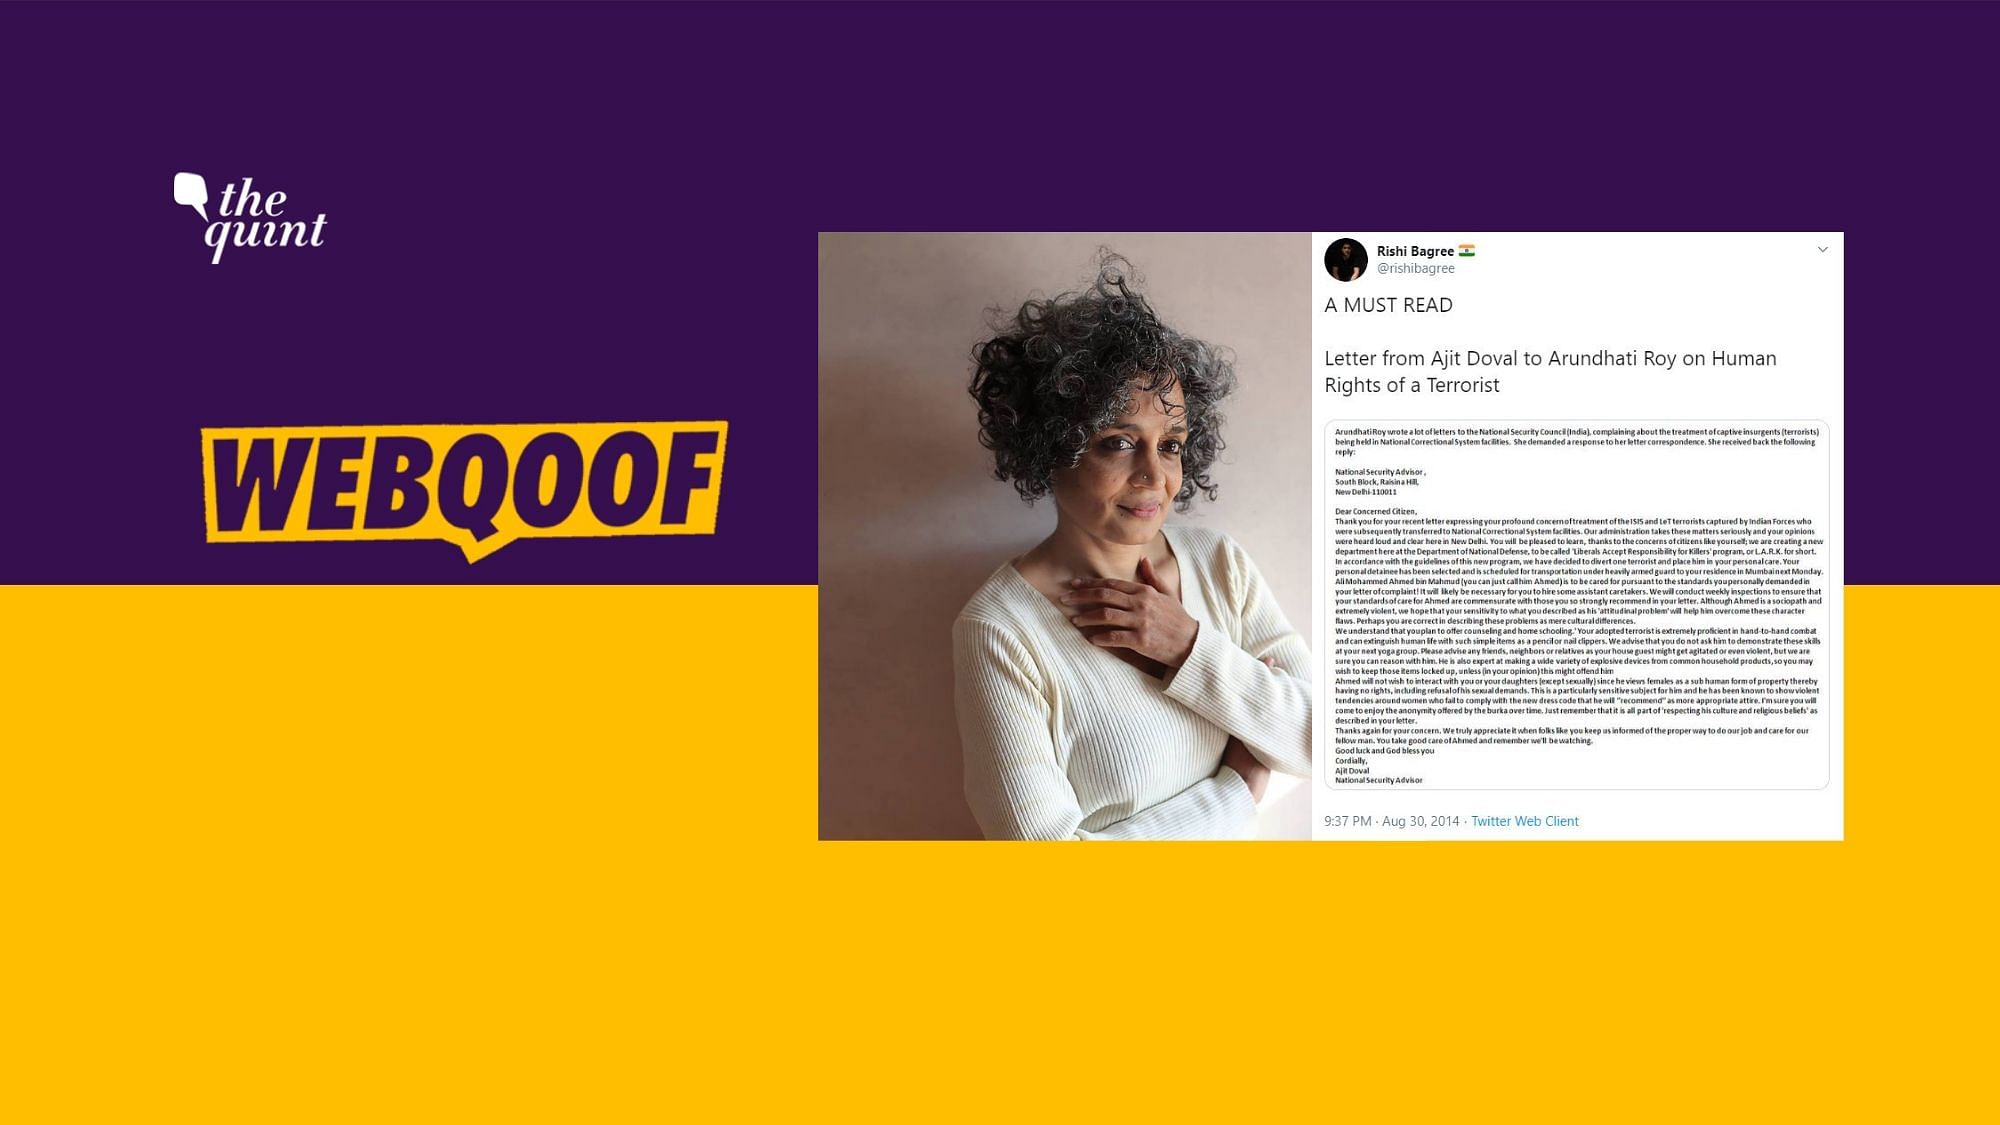 A reply to a letter complaining about the treatment of “terrorists held in National Correctional System facilities” claimed to be written by author Arundhati Roy to National Security Advisior Ajit Doval has been doing the rounds on the internet.